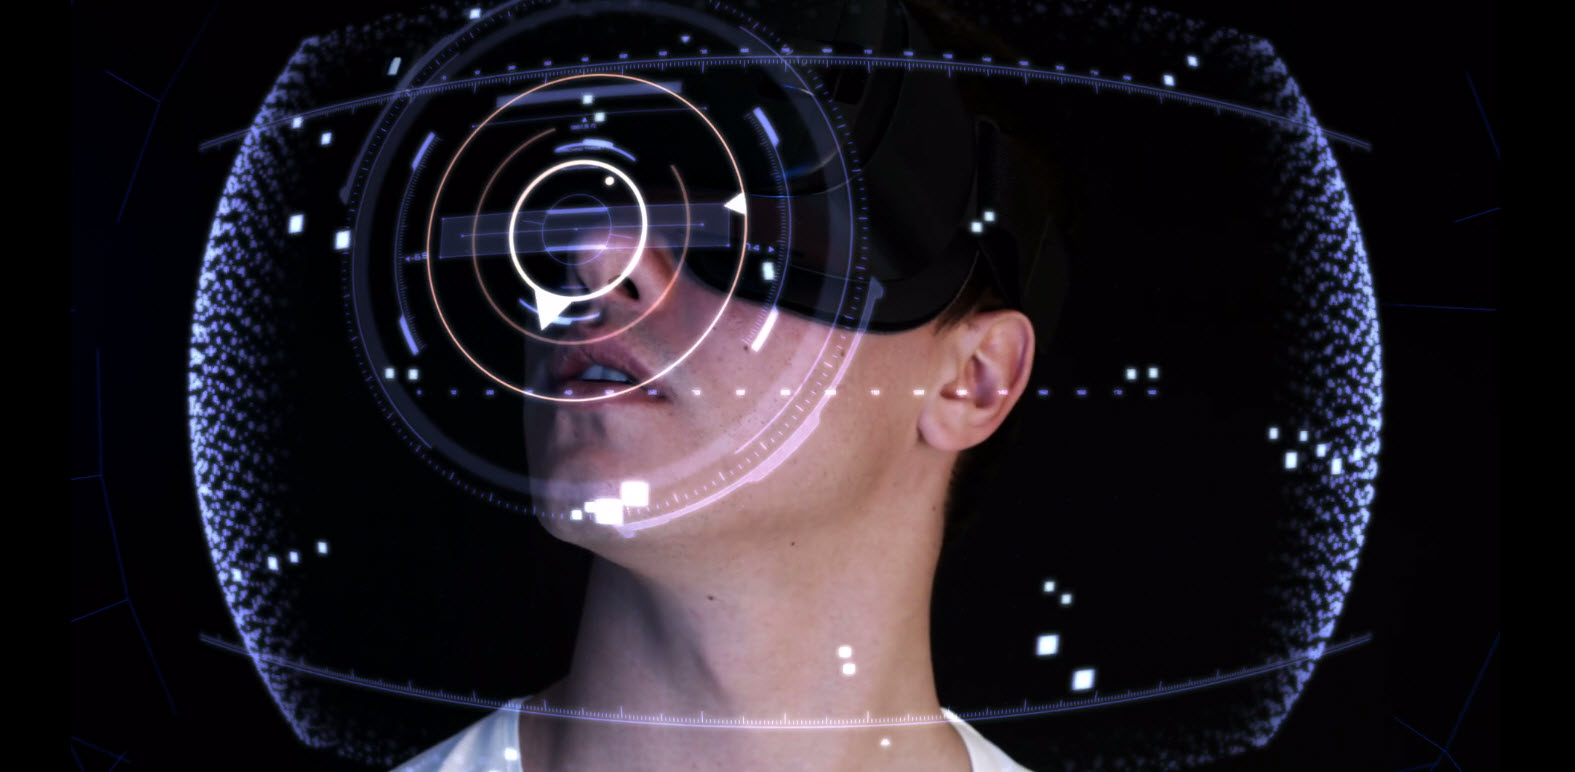  This Is How VR Can Manipulate Our Minds 2022